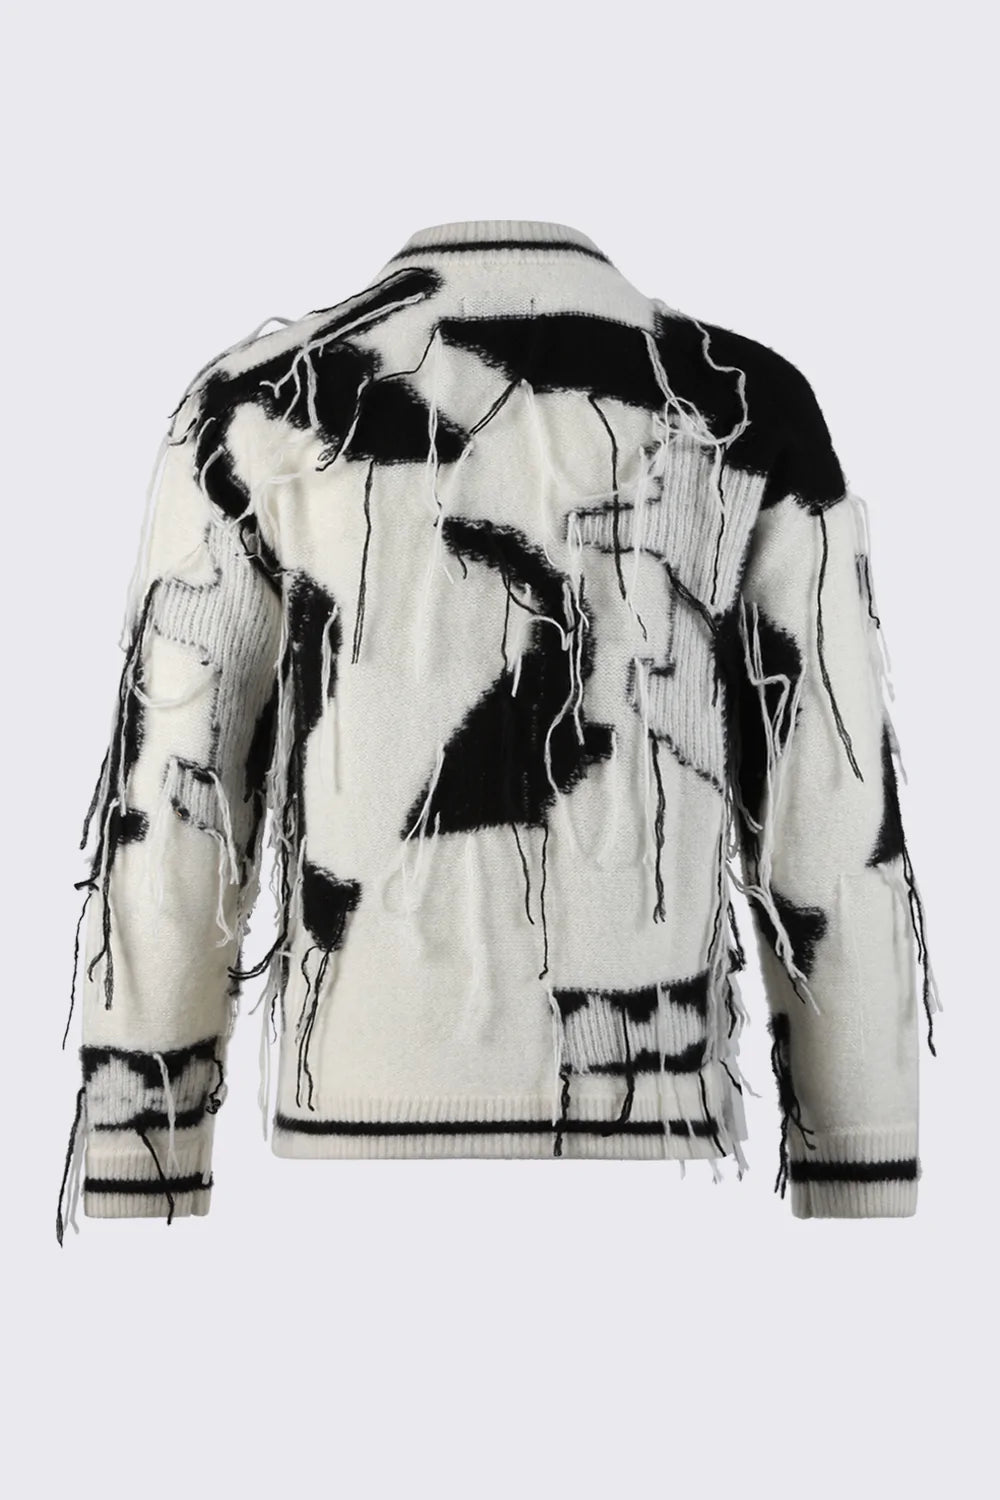 Zephyr Sweater - Black Abstract